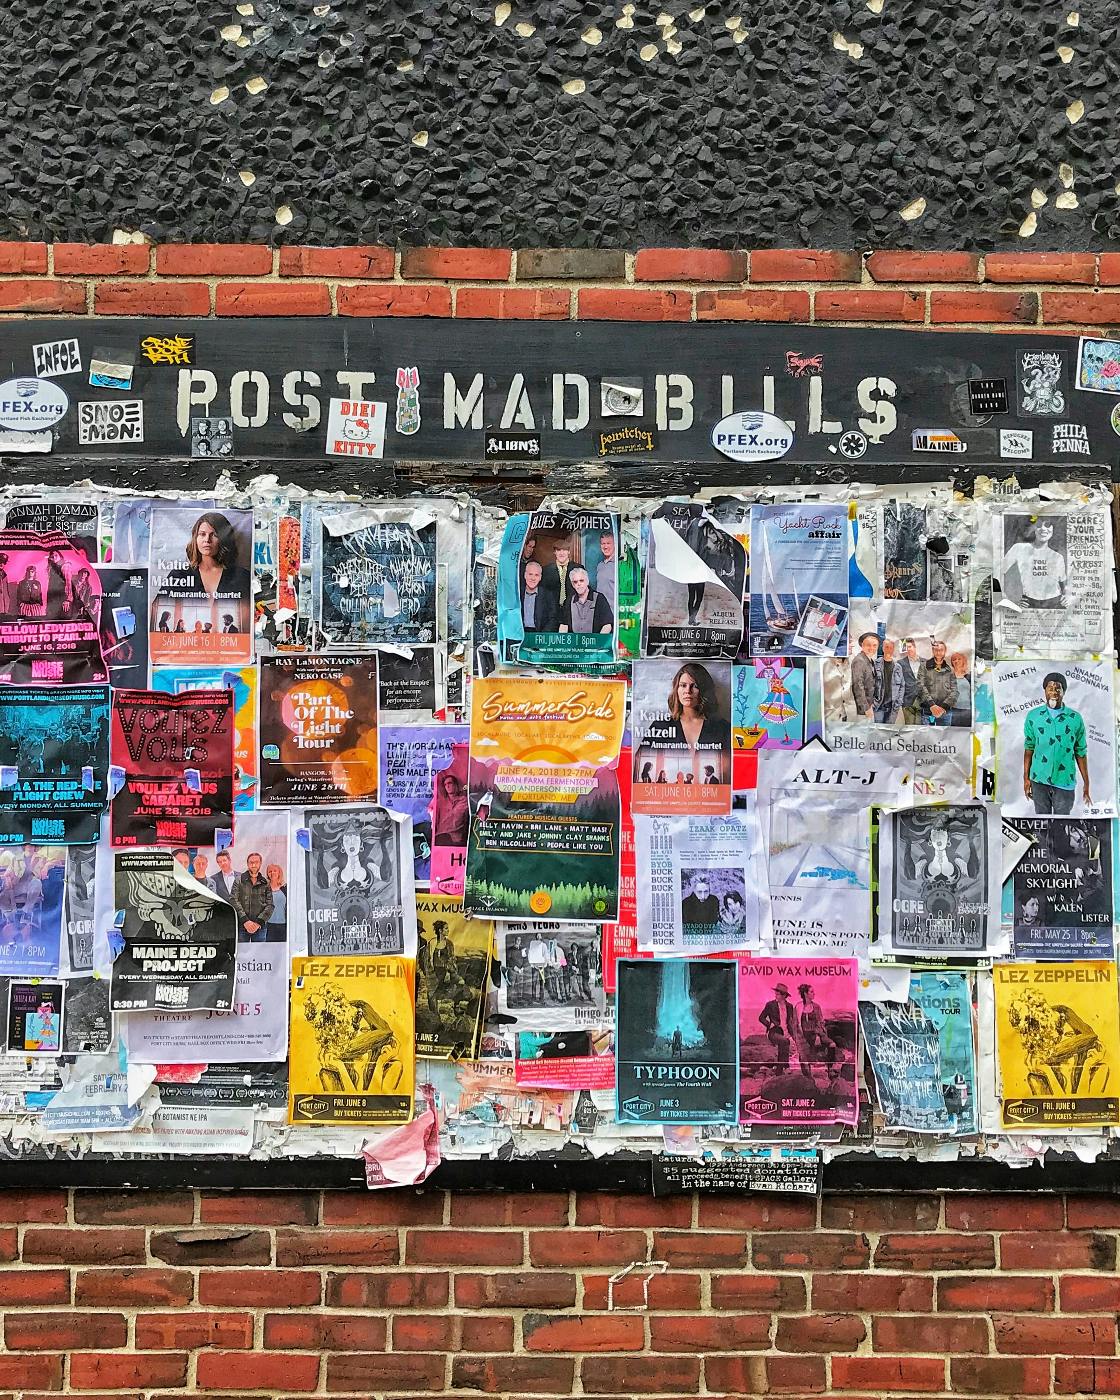 a wall with Post Mad Bills and hundreds of bills posted